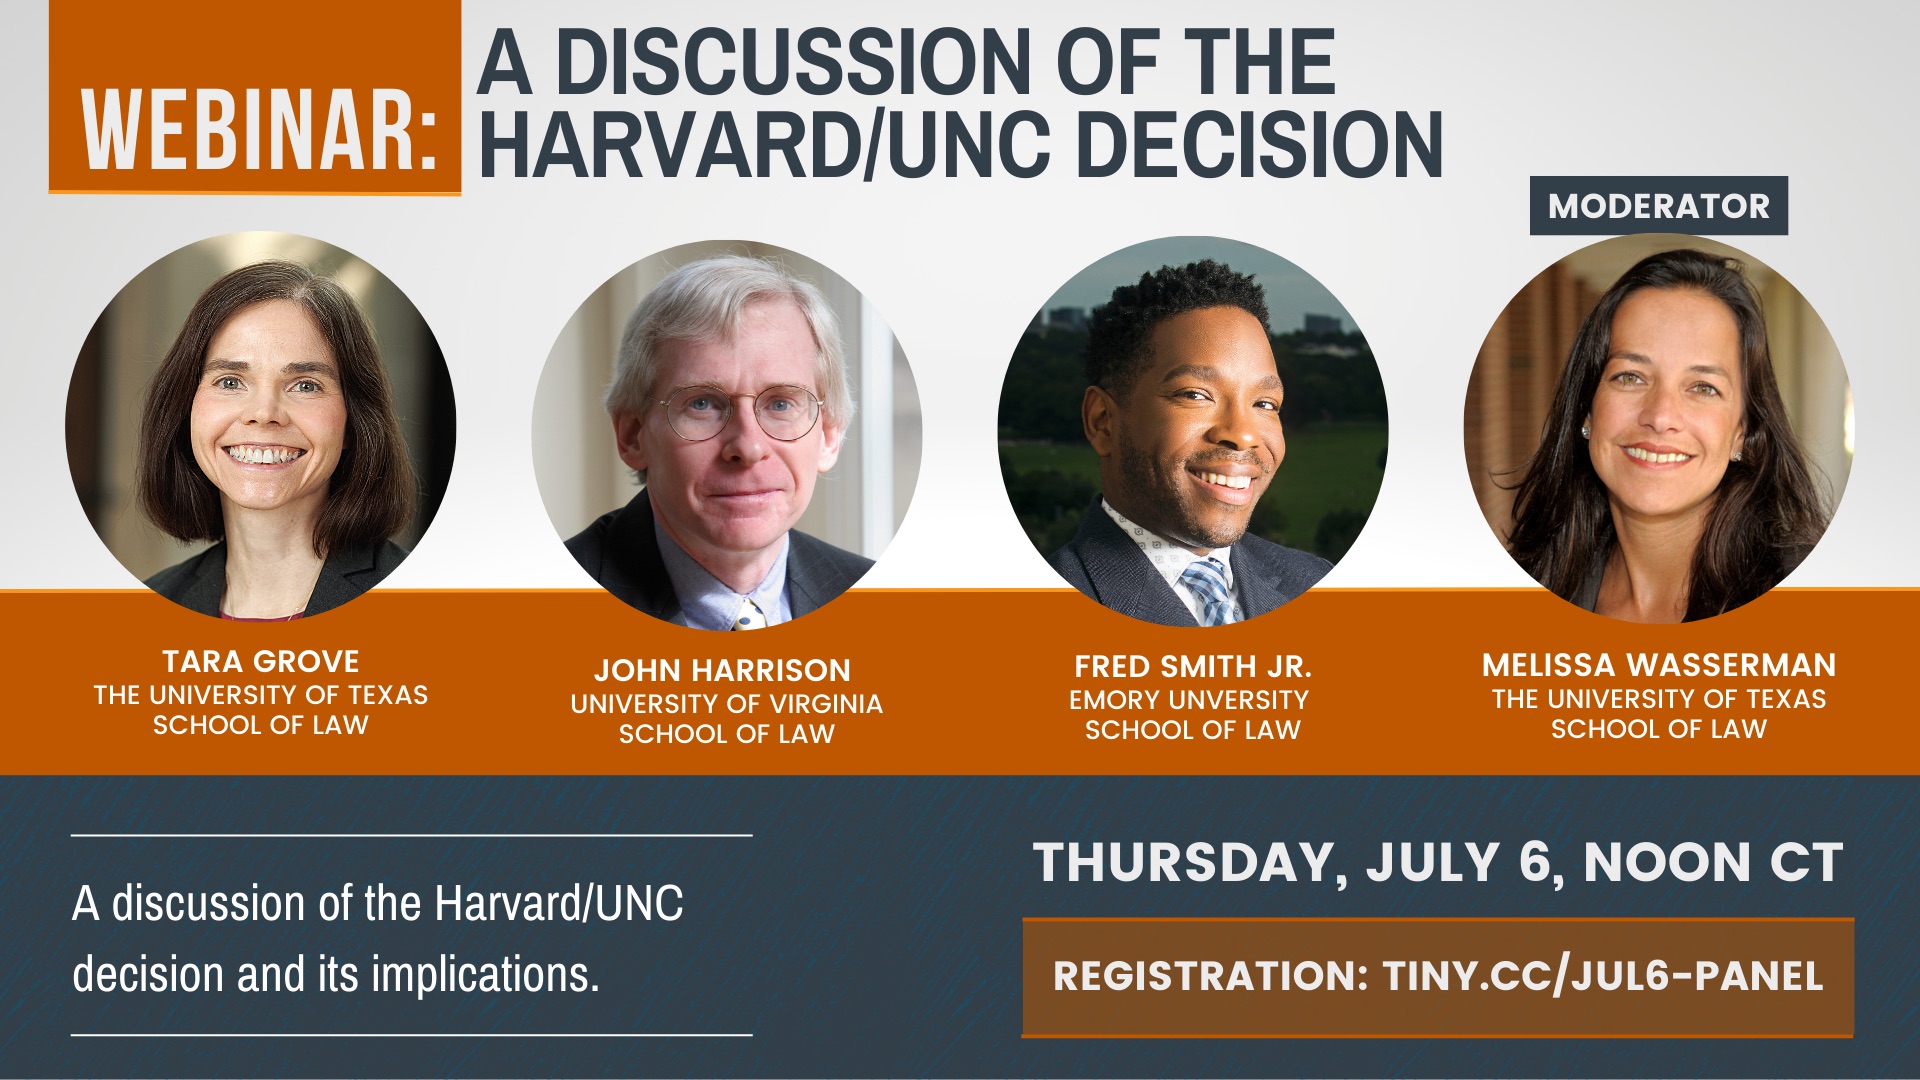 Graphic for the discussion of the Harvard/UNC decision webinar.